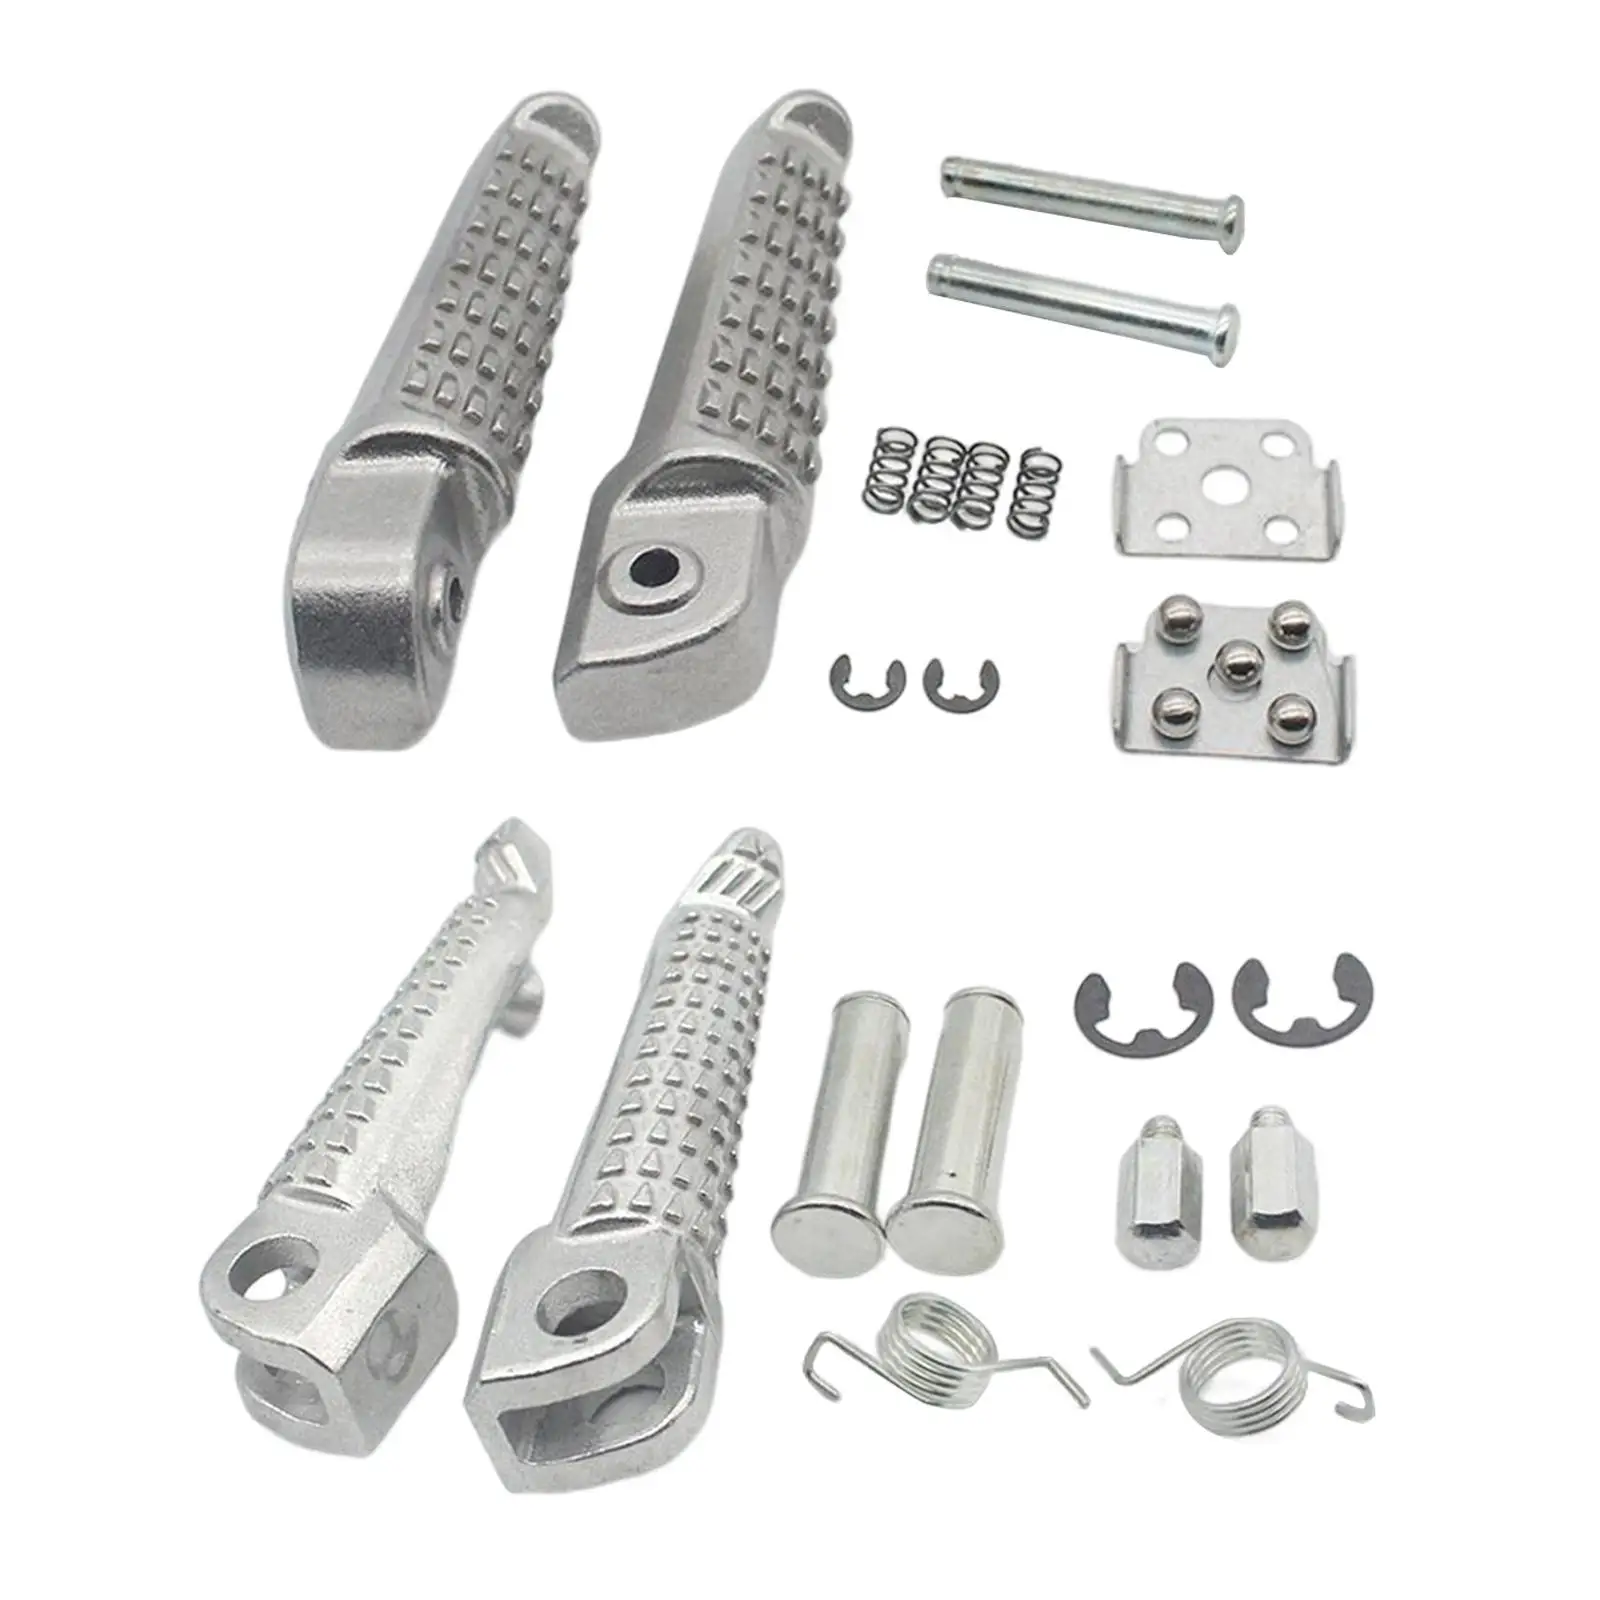 Foot Pegs Set Replacement for  er-6N er-6F er6 Kle650 